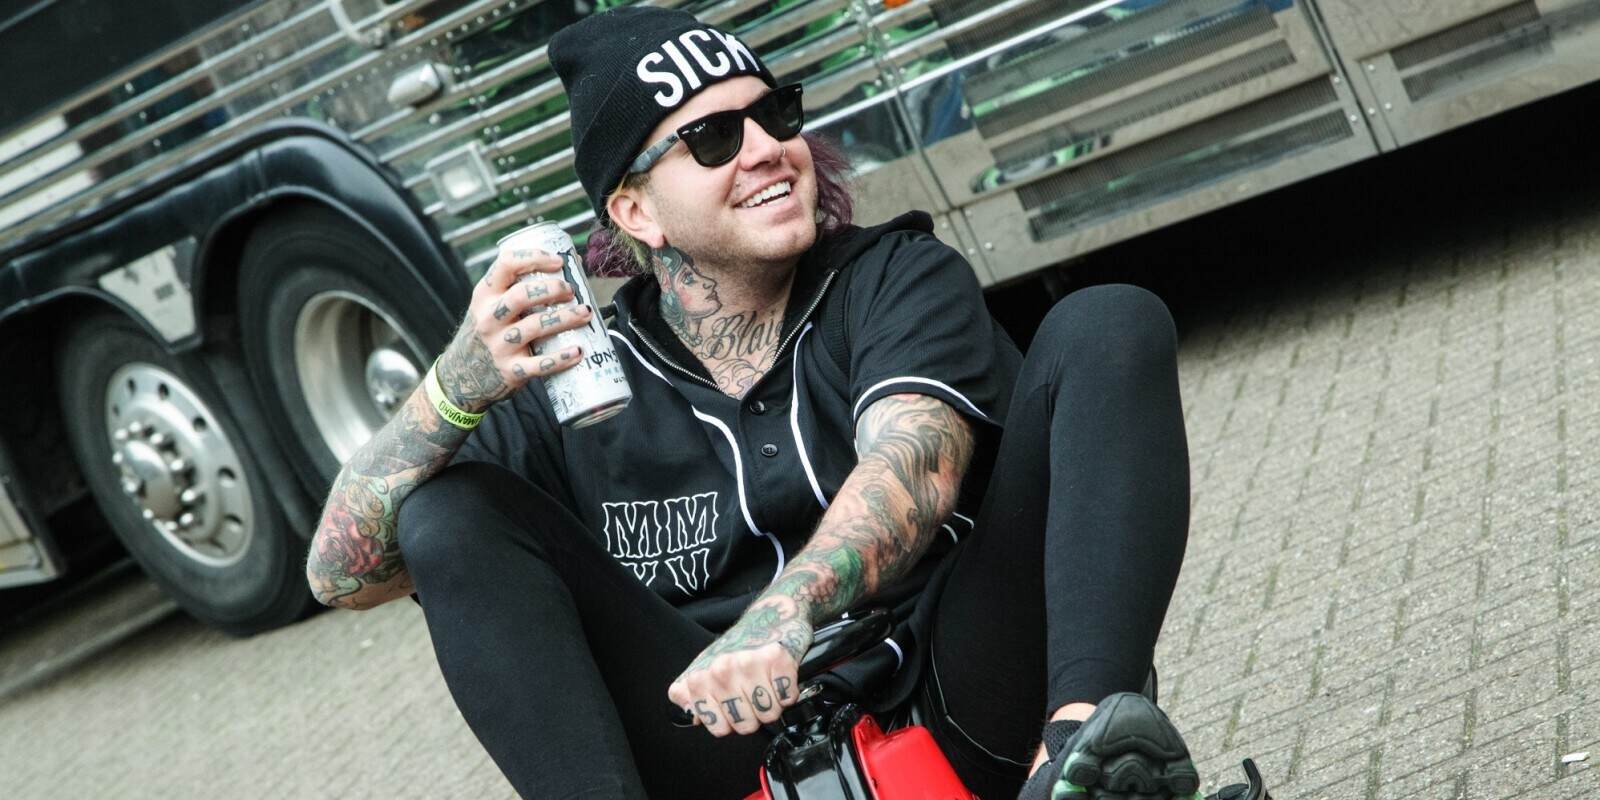 Attila’s Chris "Fronz" Fronzak responds to mean tweets from his h...